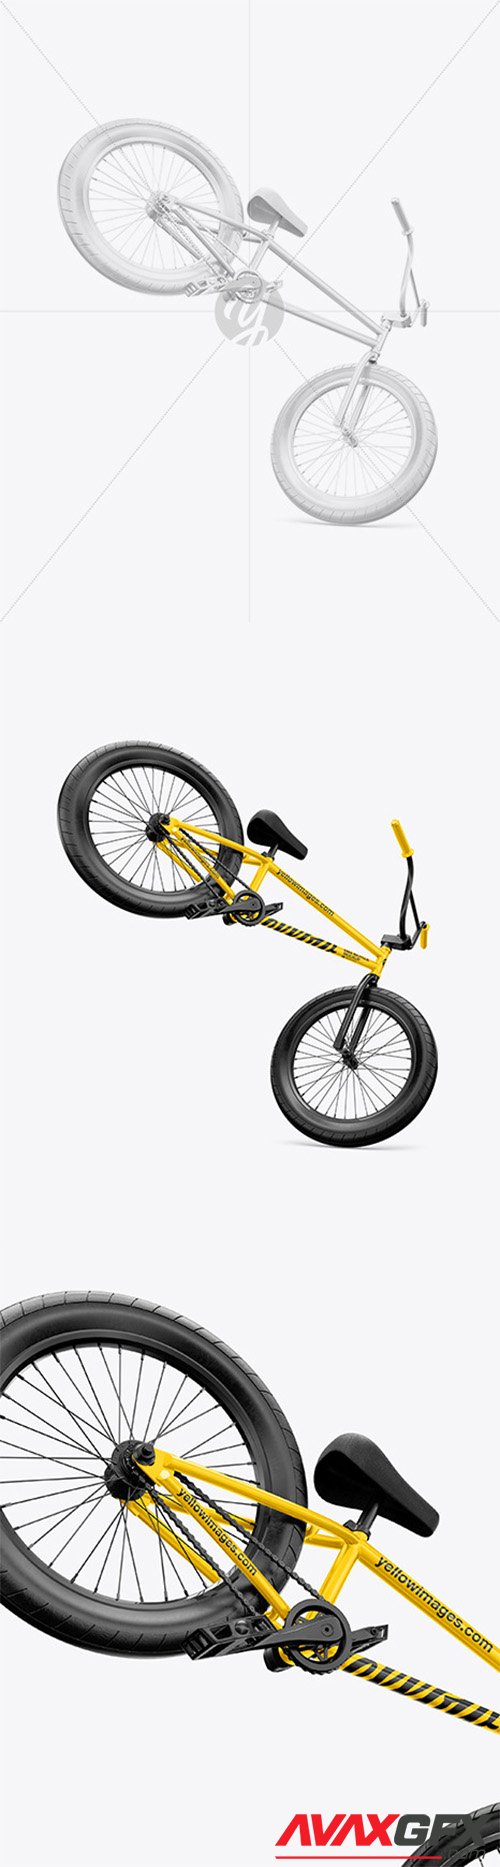 BMX Bicycle Mockup - Right Side View 65230